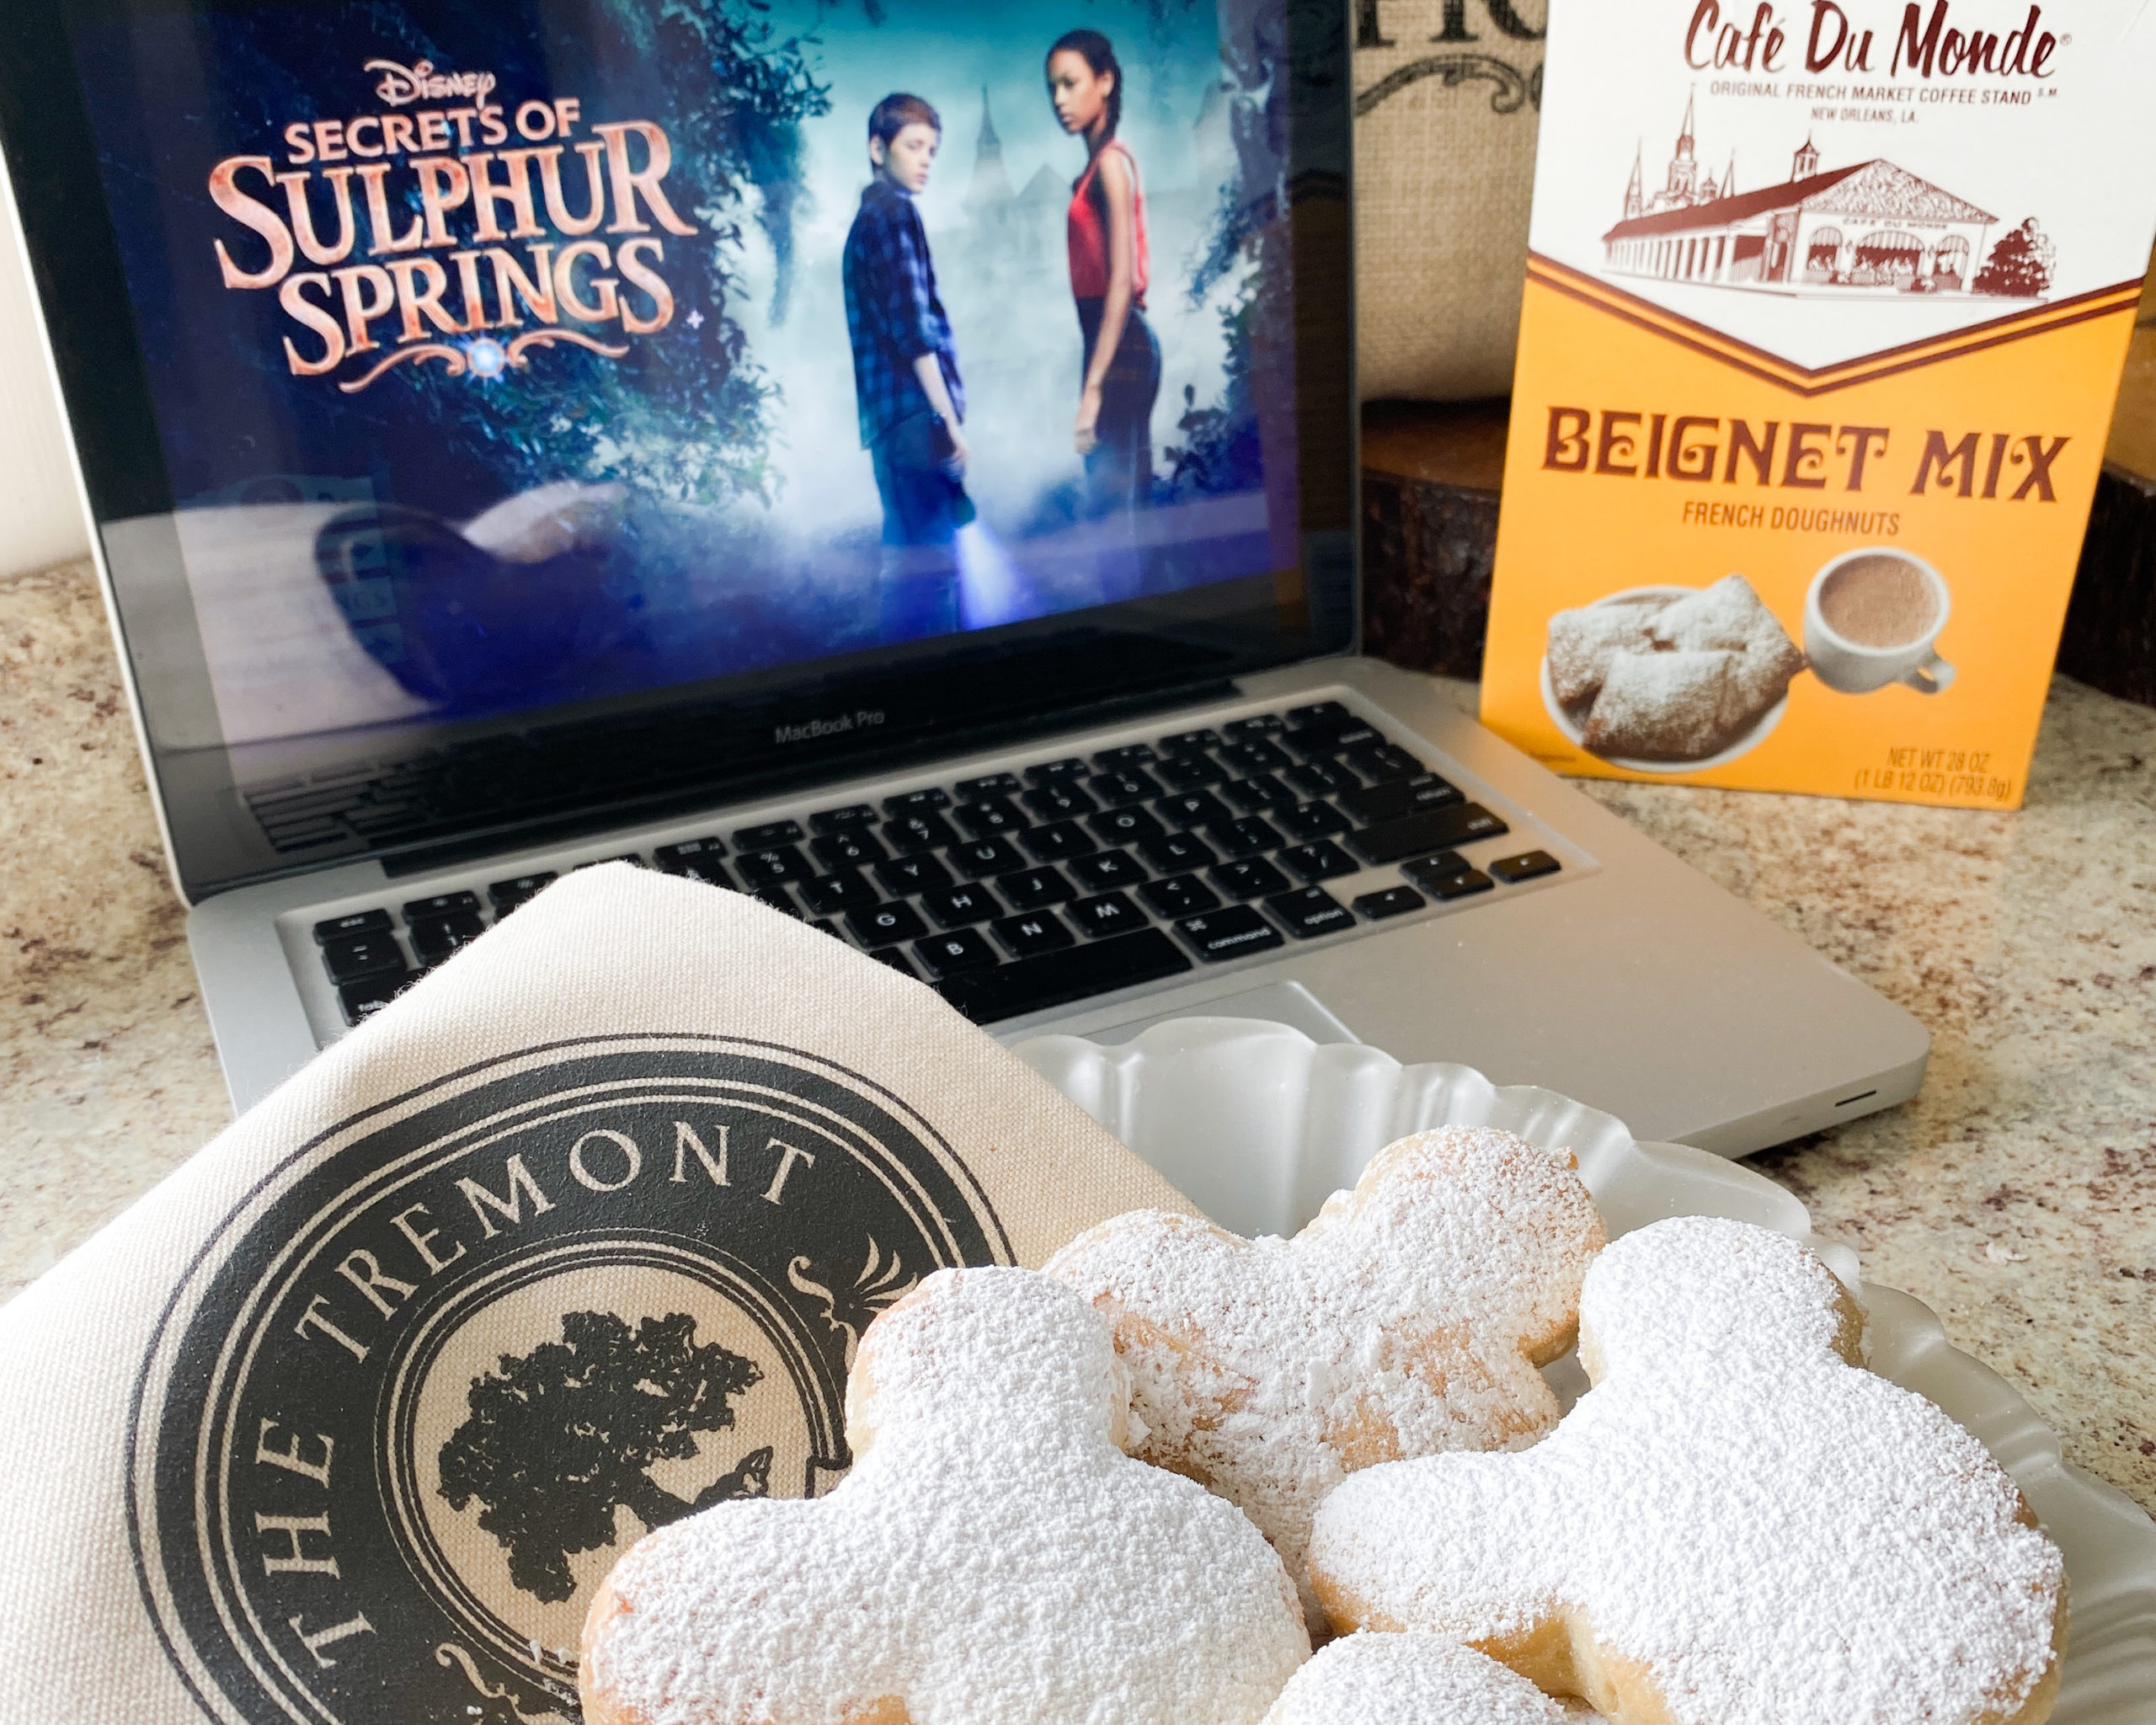 Secrets Of Sulphur Springs airs Fridays on Disney Channel perfectly paired with Cafe Du Monde New Orleans style beignets.